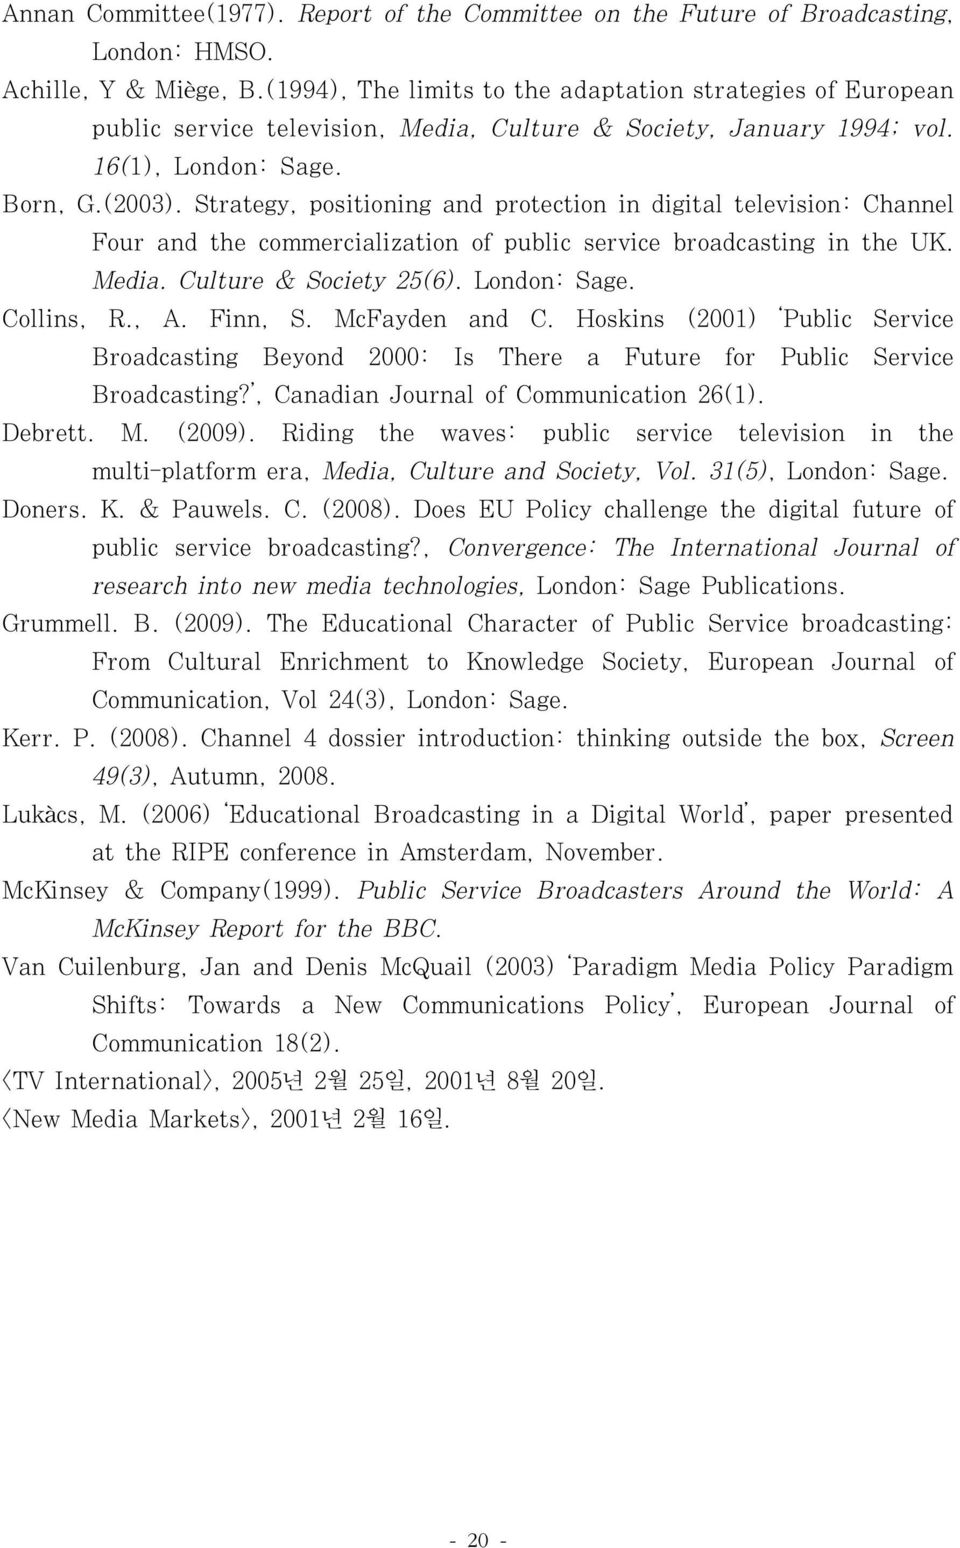 Strategy, positioning and protection in digital television: Channel Four and the commercialization of public service broadcasting in the UK. Media. Culture & Society 25(6). London: Sage. Collins, R.